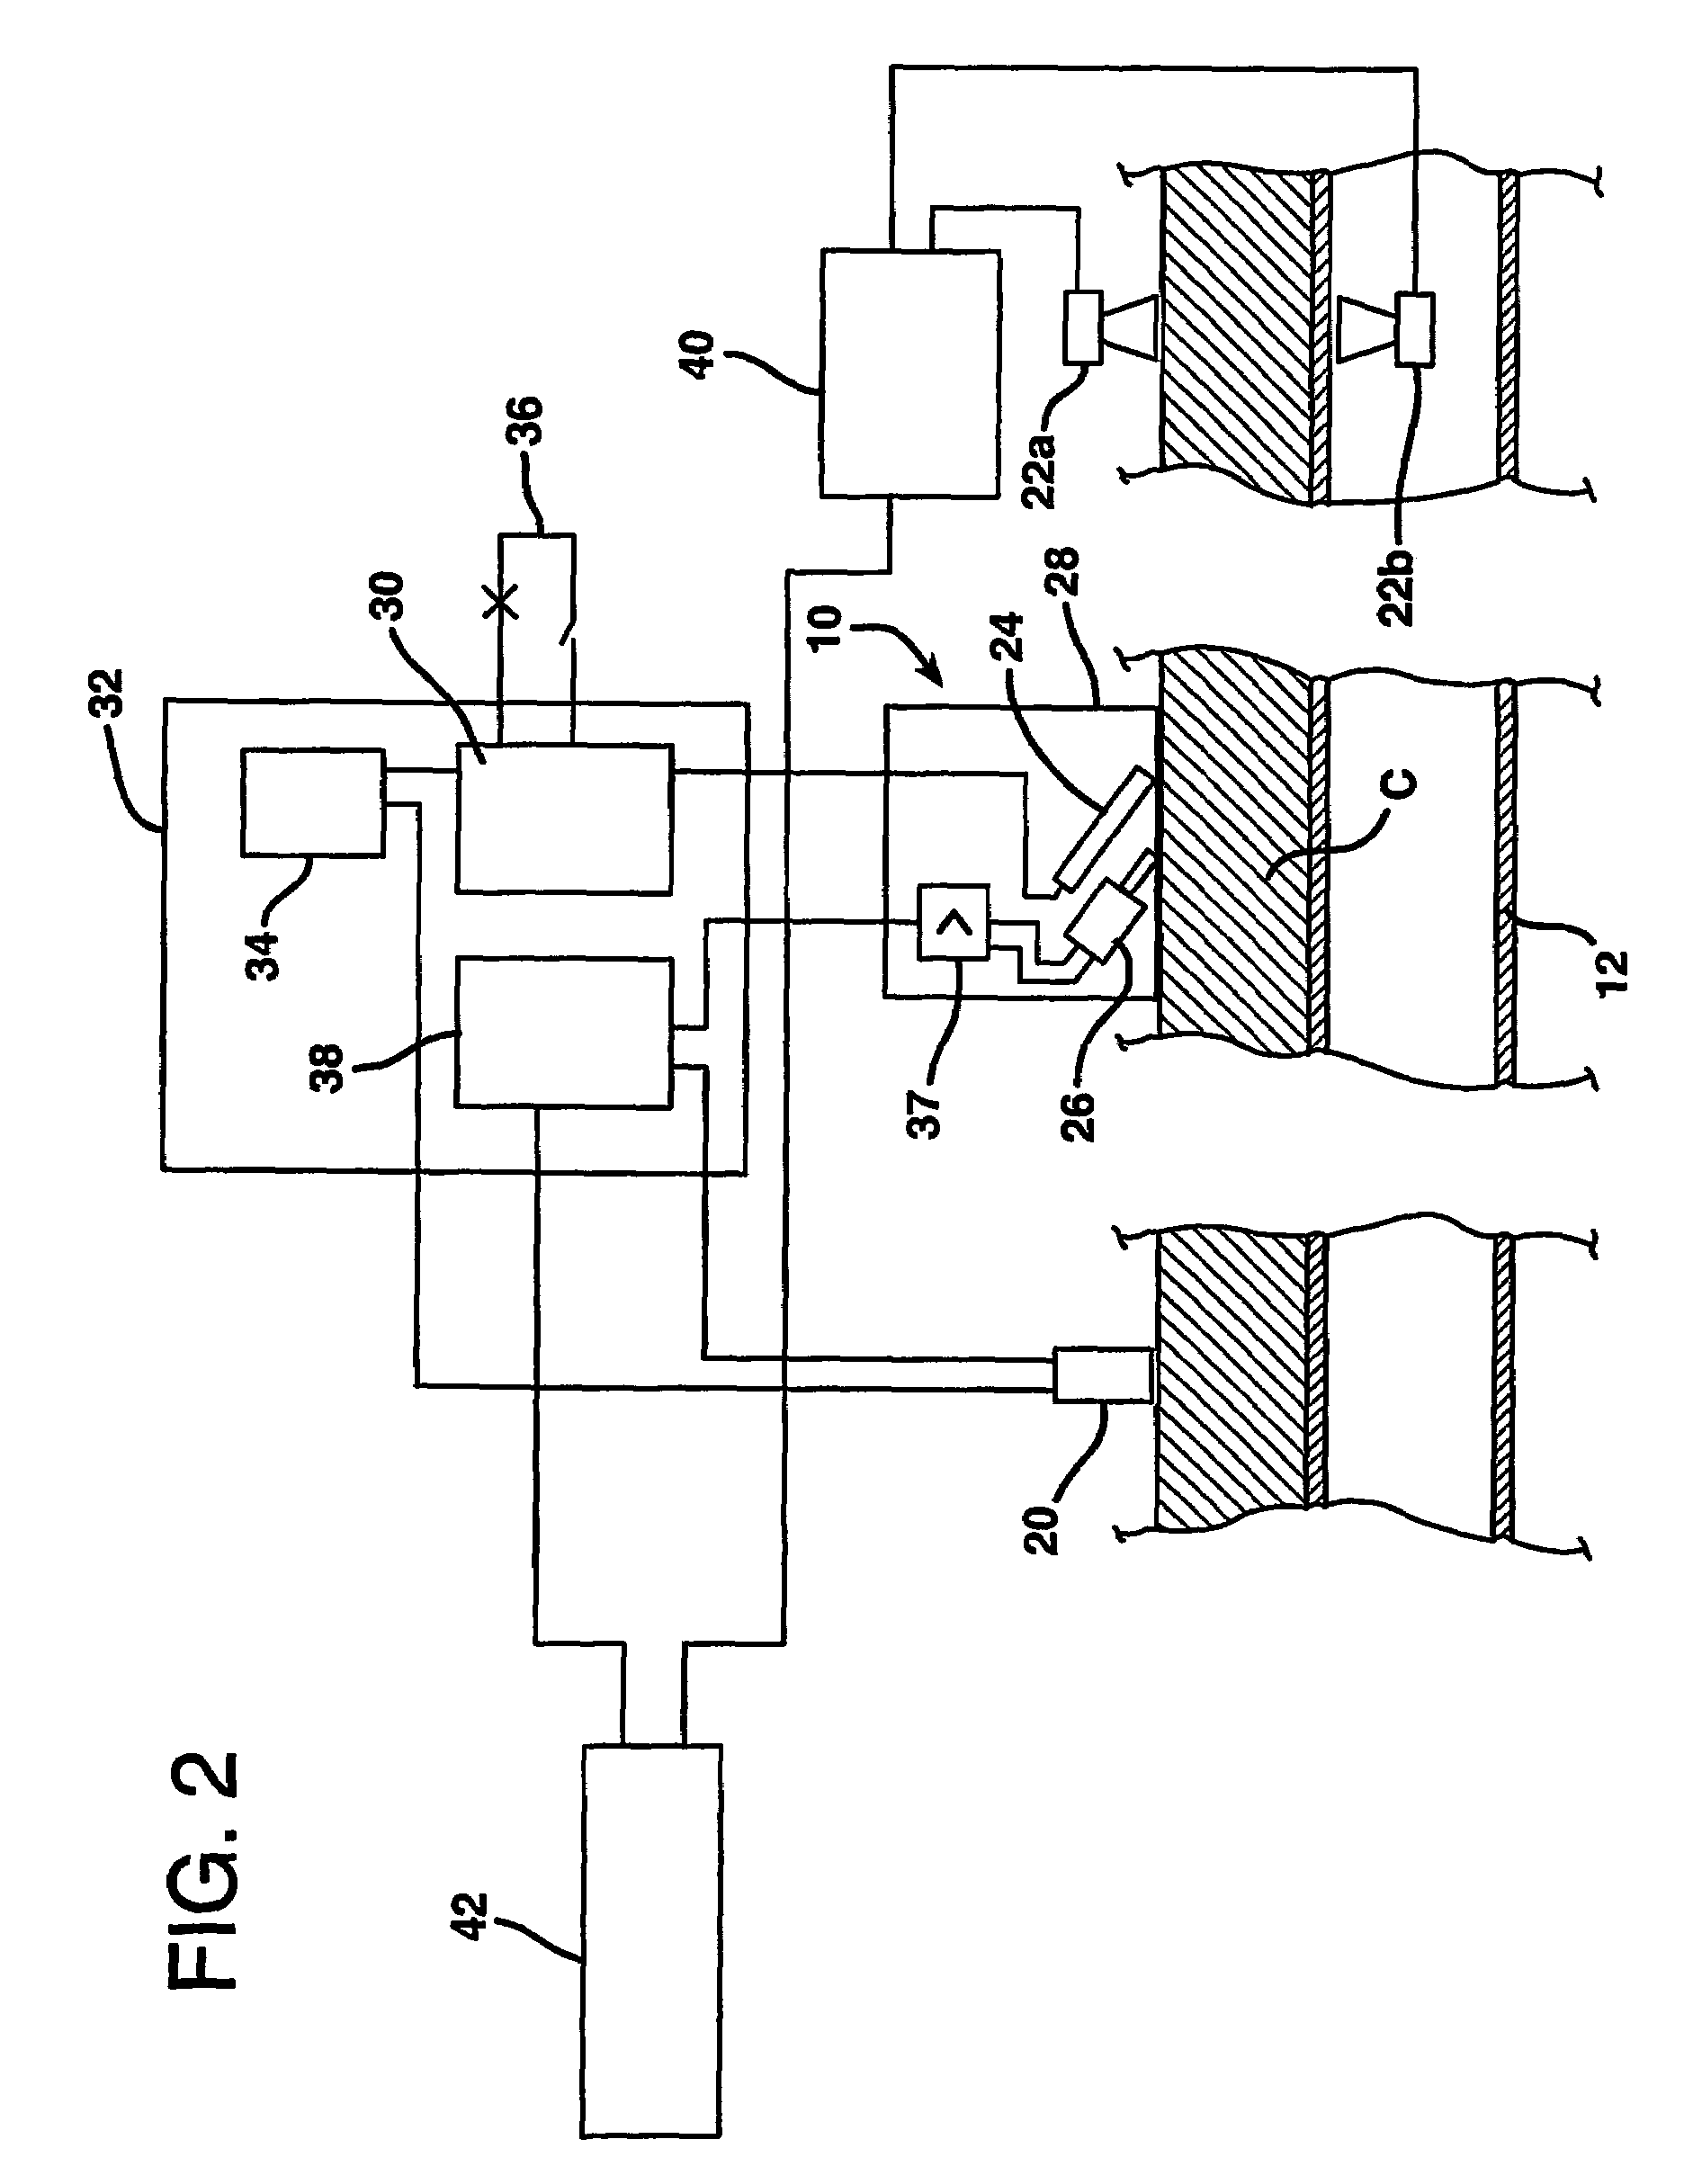 X-ray fluorescence measuring system and methods for trace elements